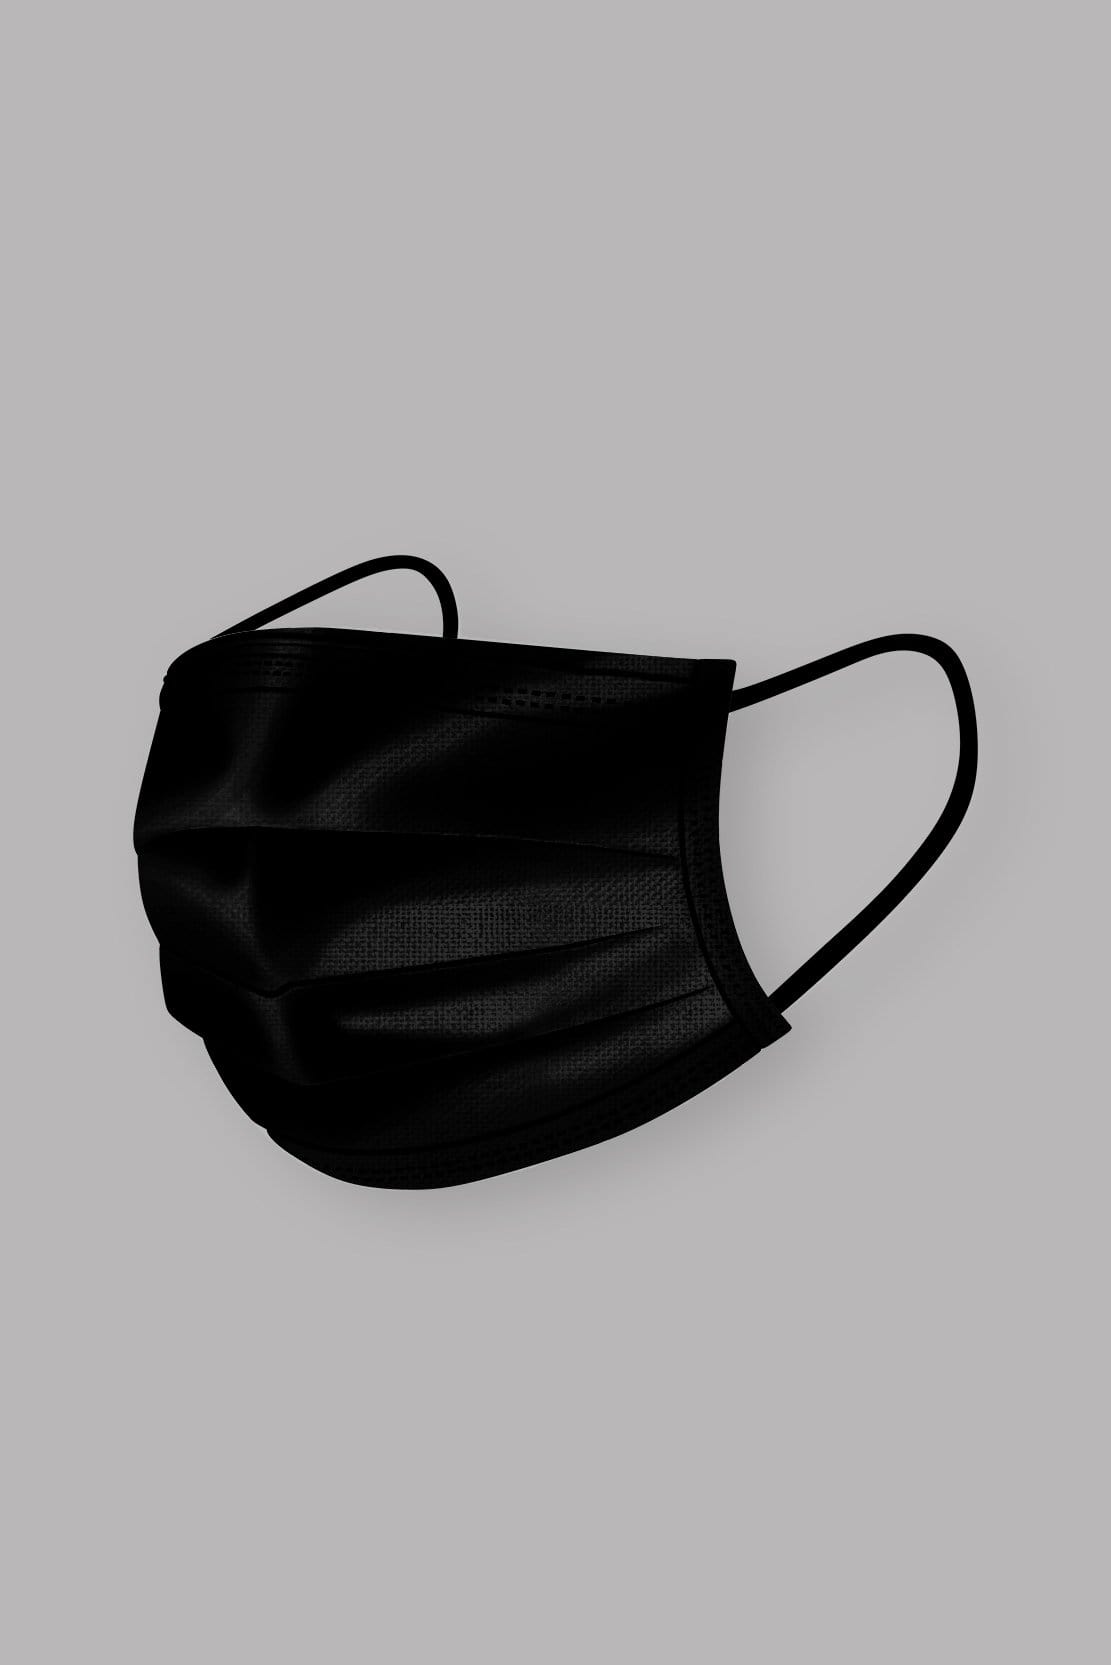 Stylish Black Pleated face mask, with soft black ear loops and high quality fabric. 